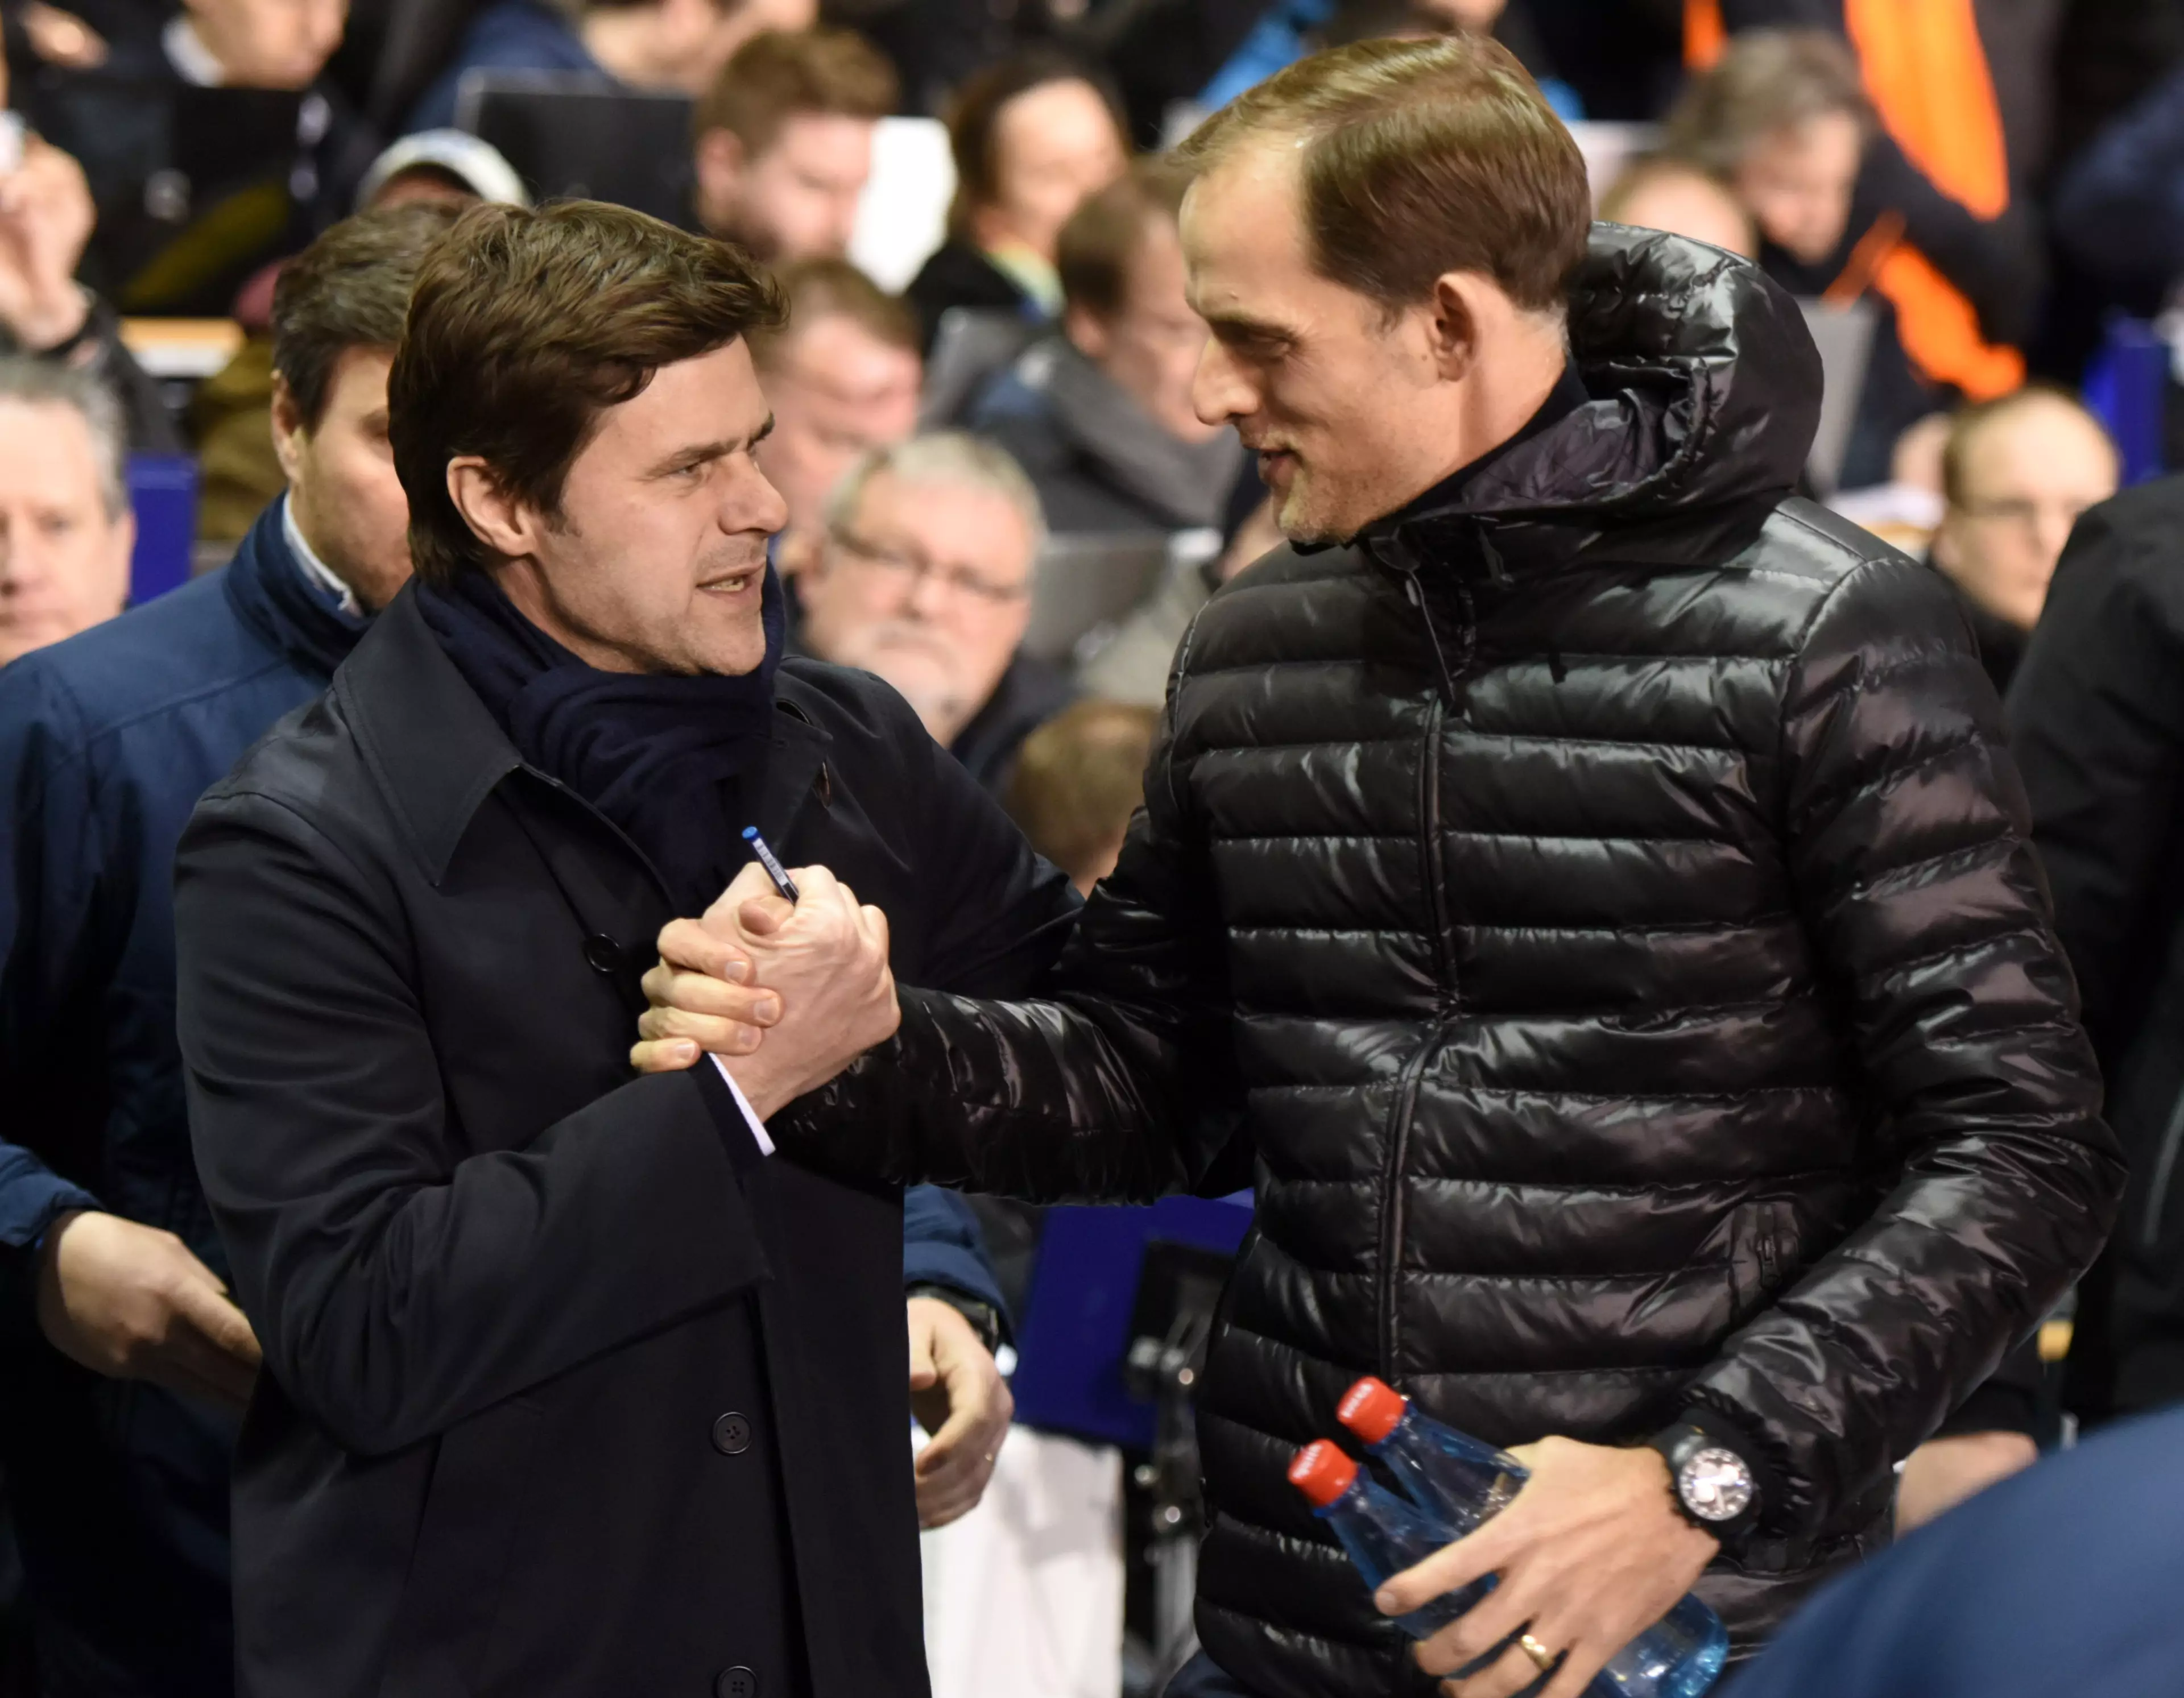 Poch and Tuchel managing against each other for Spurs and Dortmund in 2016. Image: PA Images